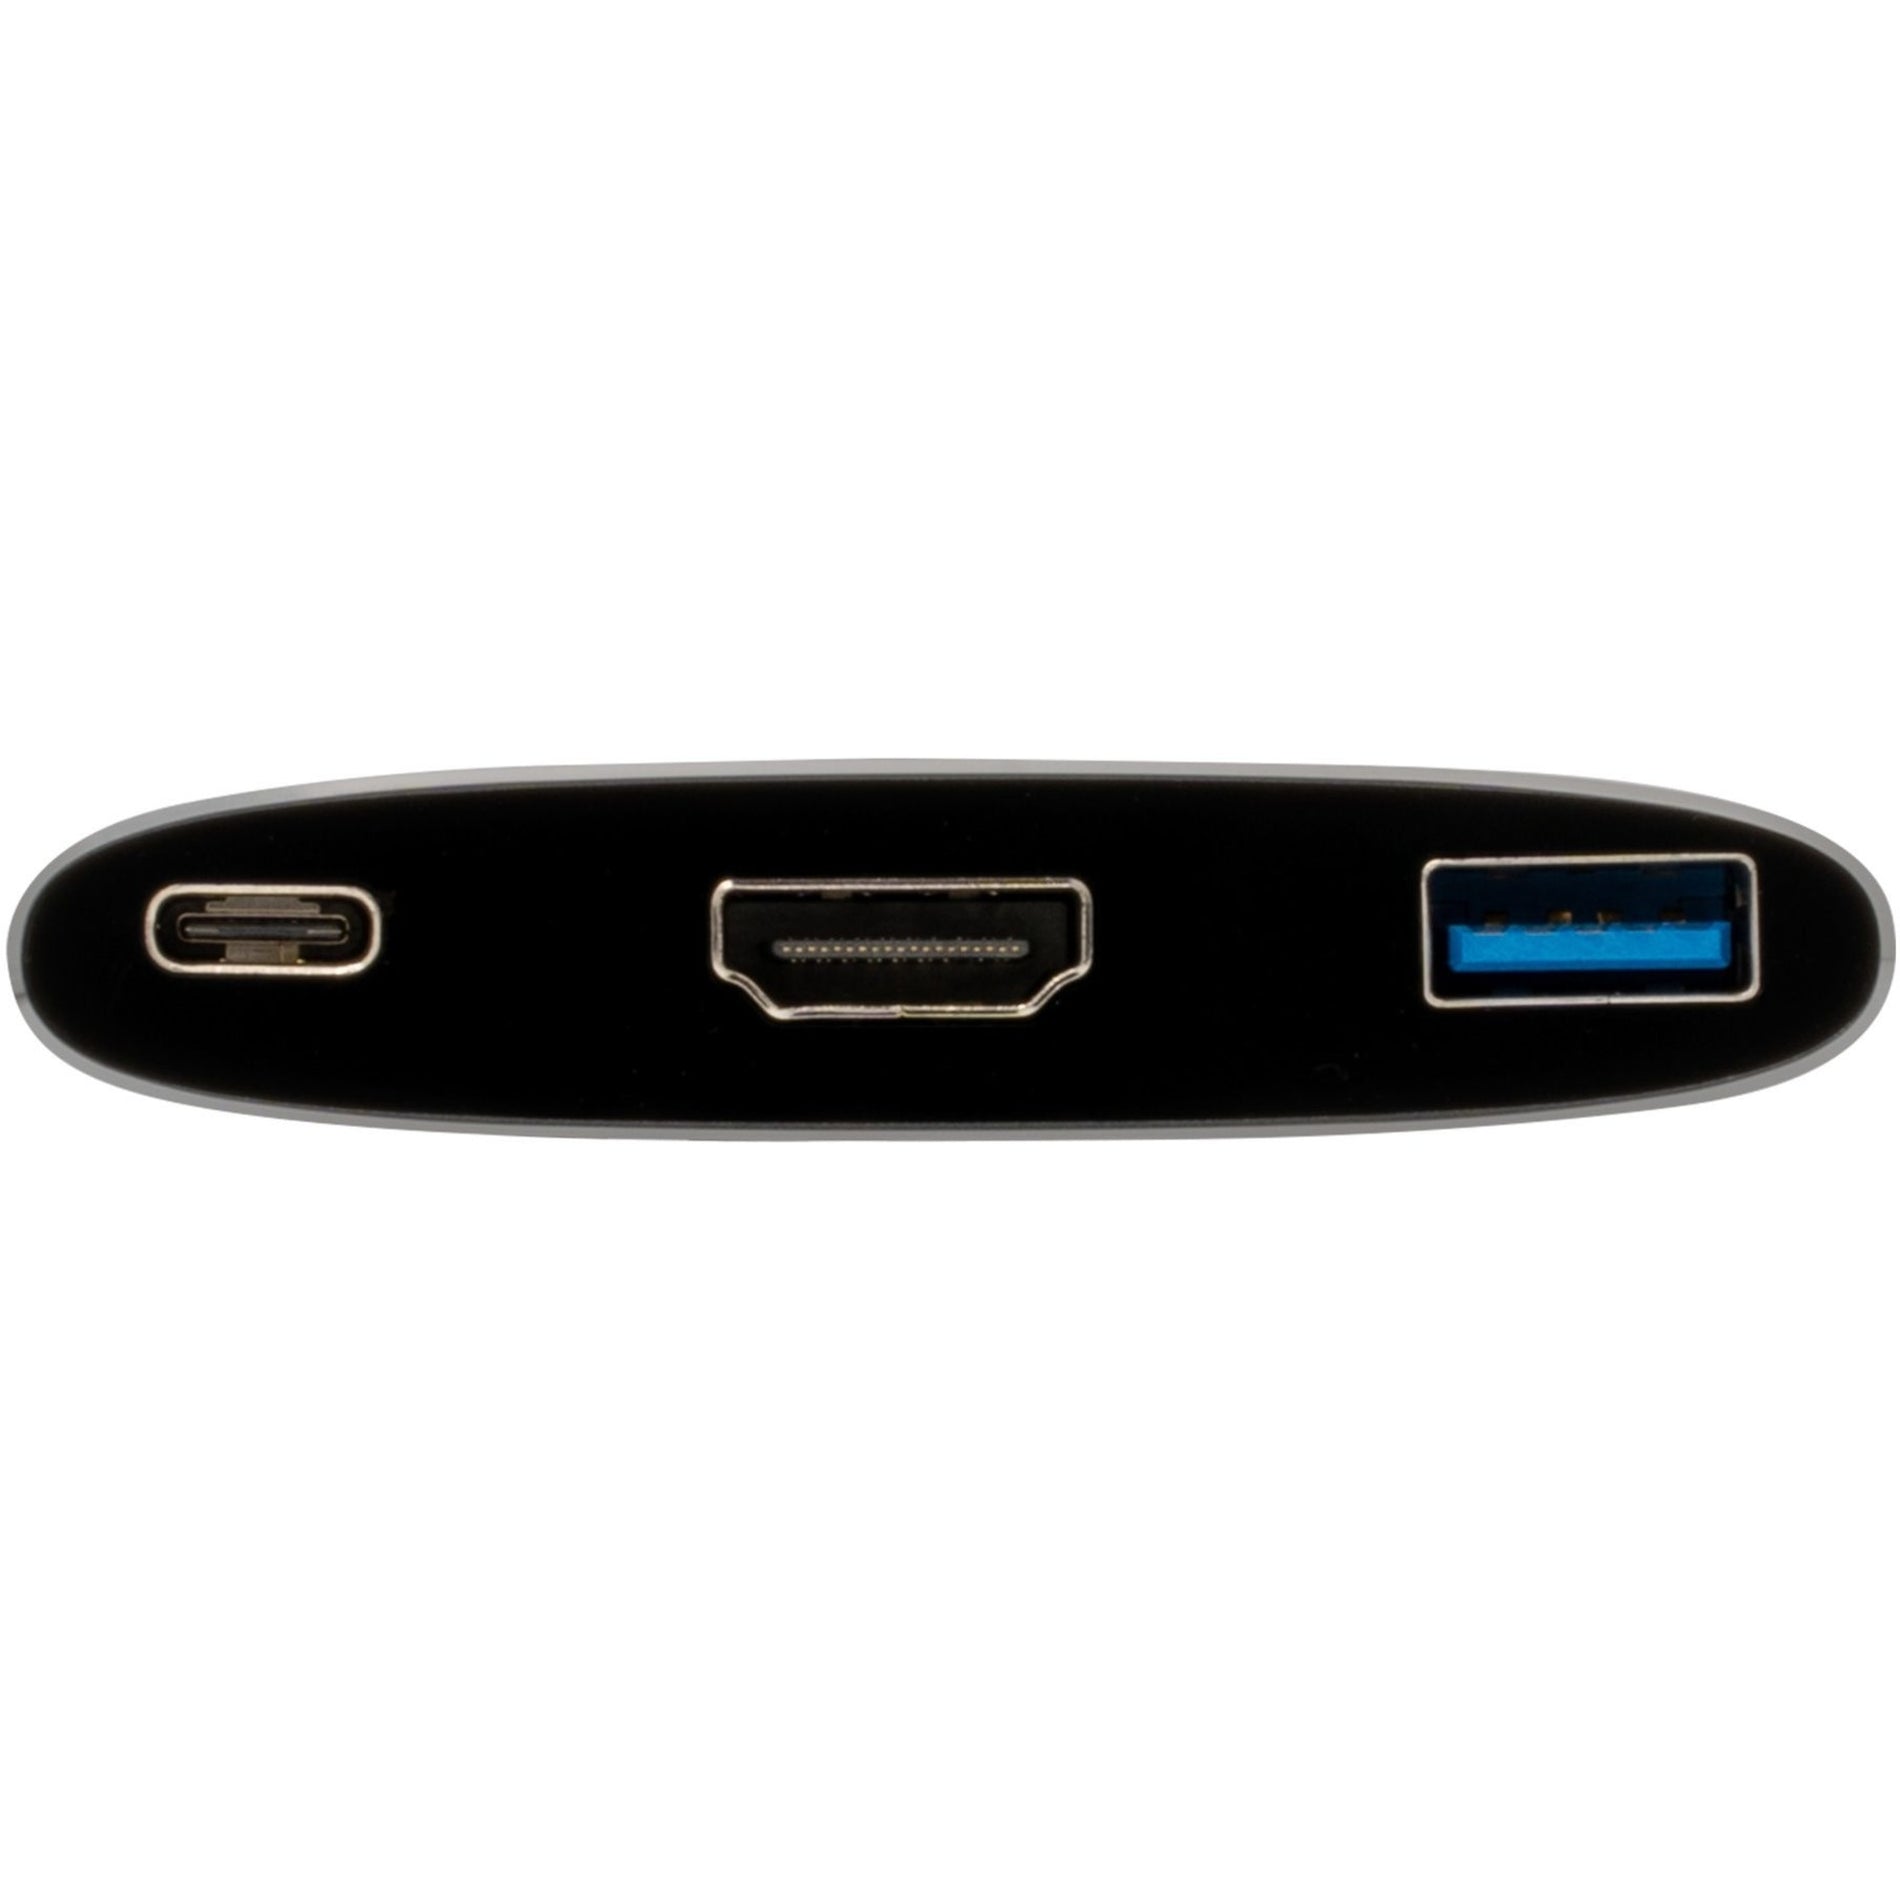 VisionTek 901356 USB-C to HDMI, USB & USB-C with Power Delivery Adapter, Plug and Play, 3840 x 2160 Resolution Supported